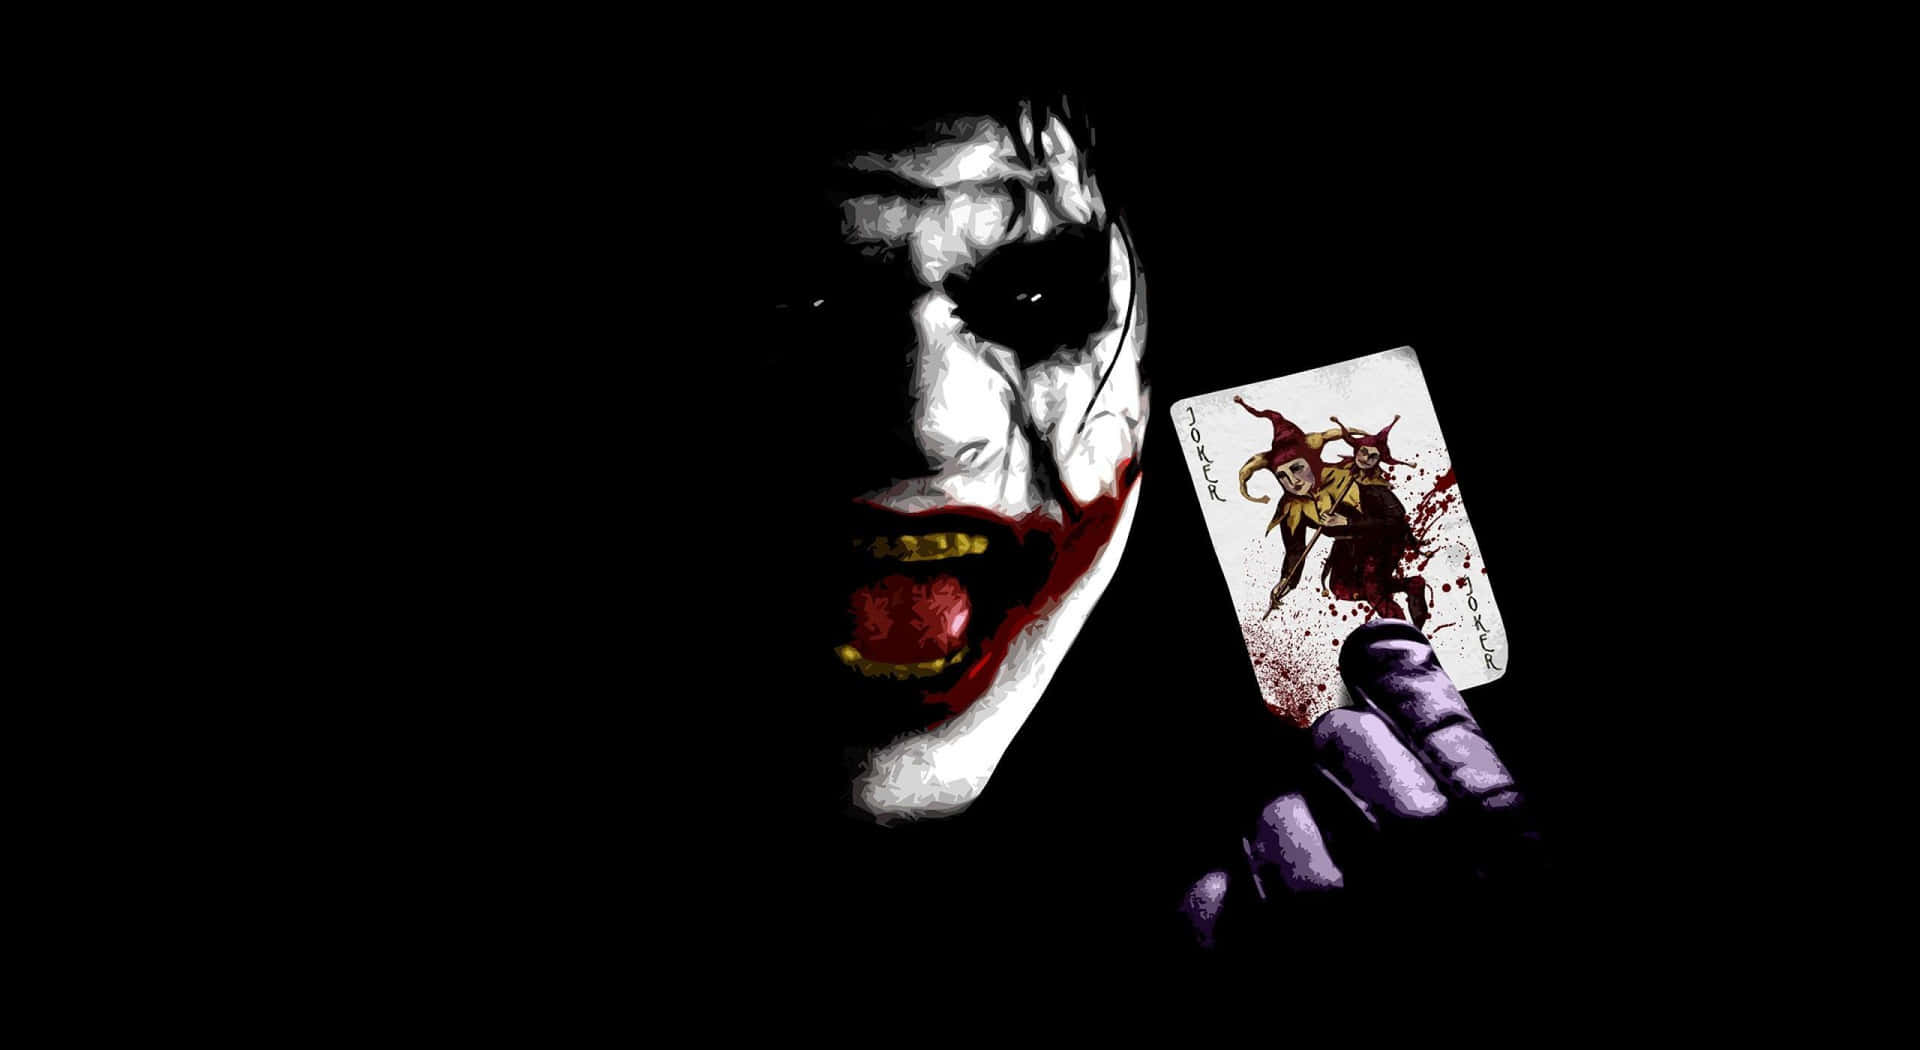 The Joker laughing maniacally in darkness Wallpaper